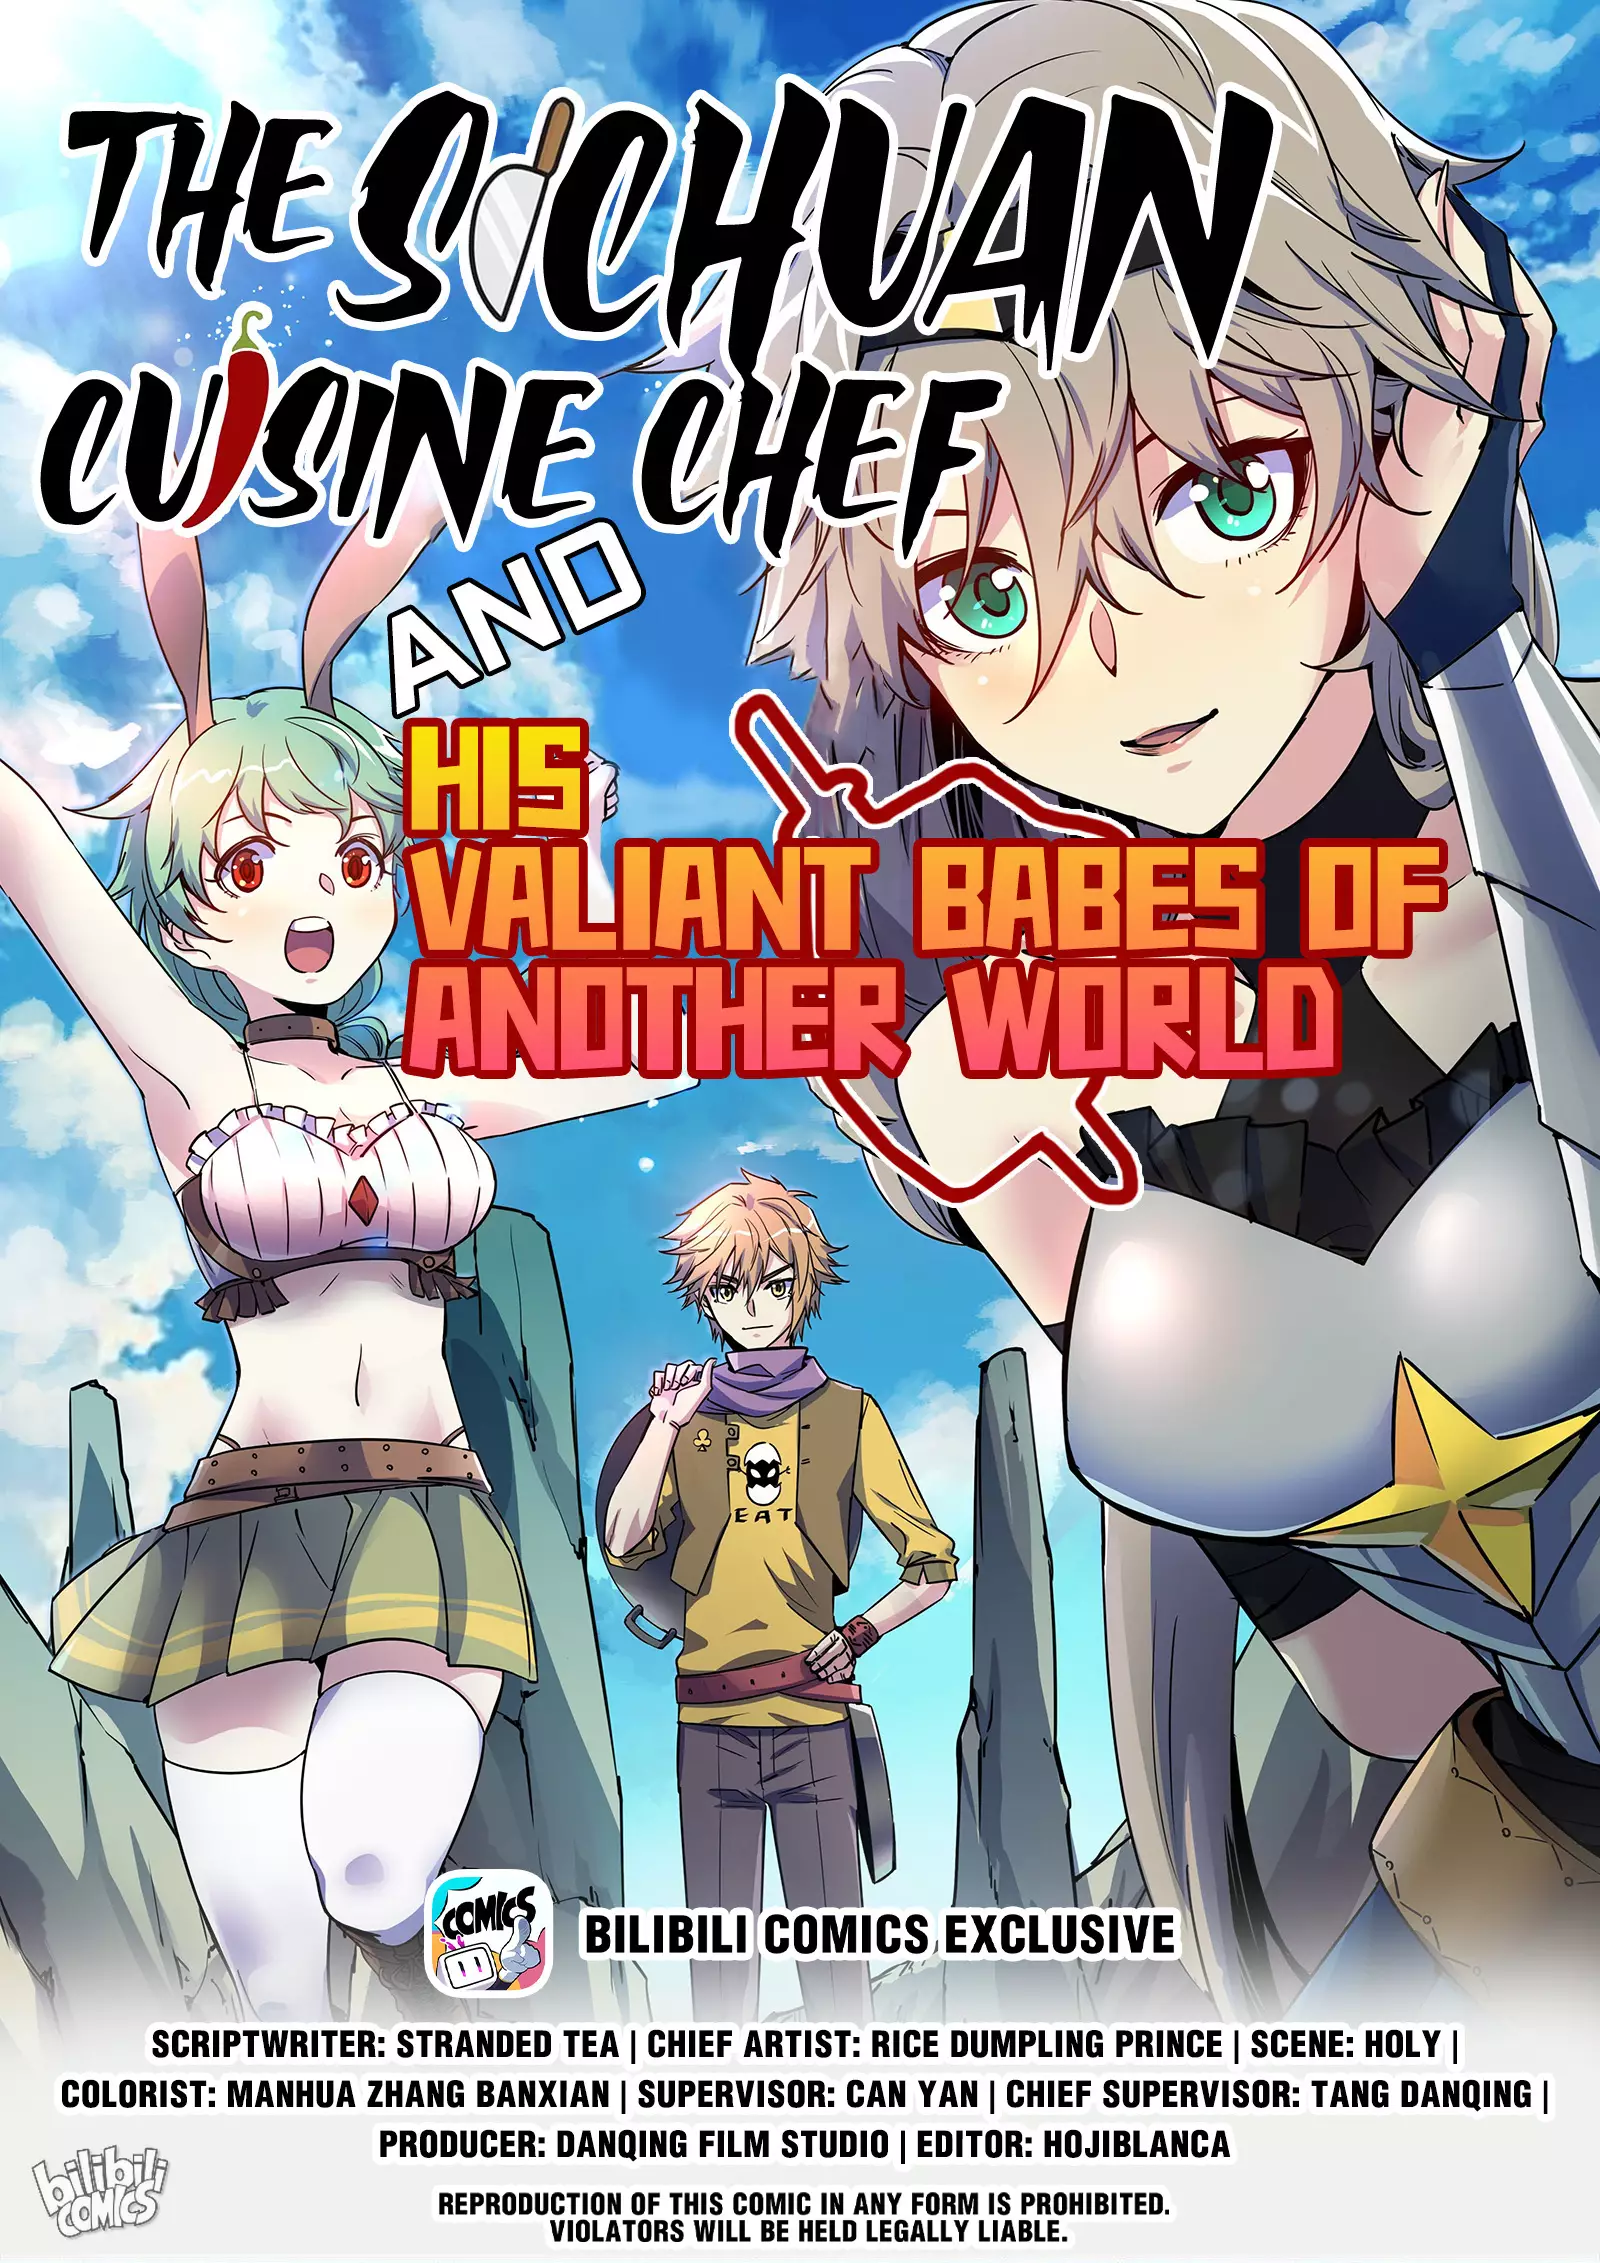 The Sichuan Cuisine Chef And His Valiant Babes Of Another World - 13 page 1-fdd2d0bf